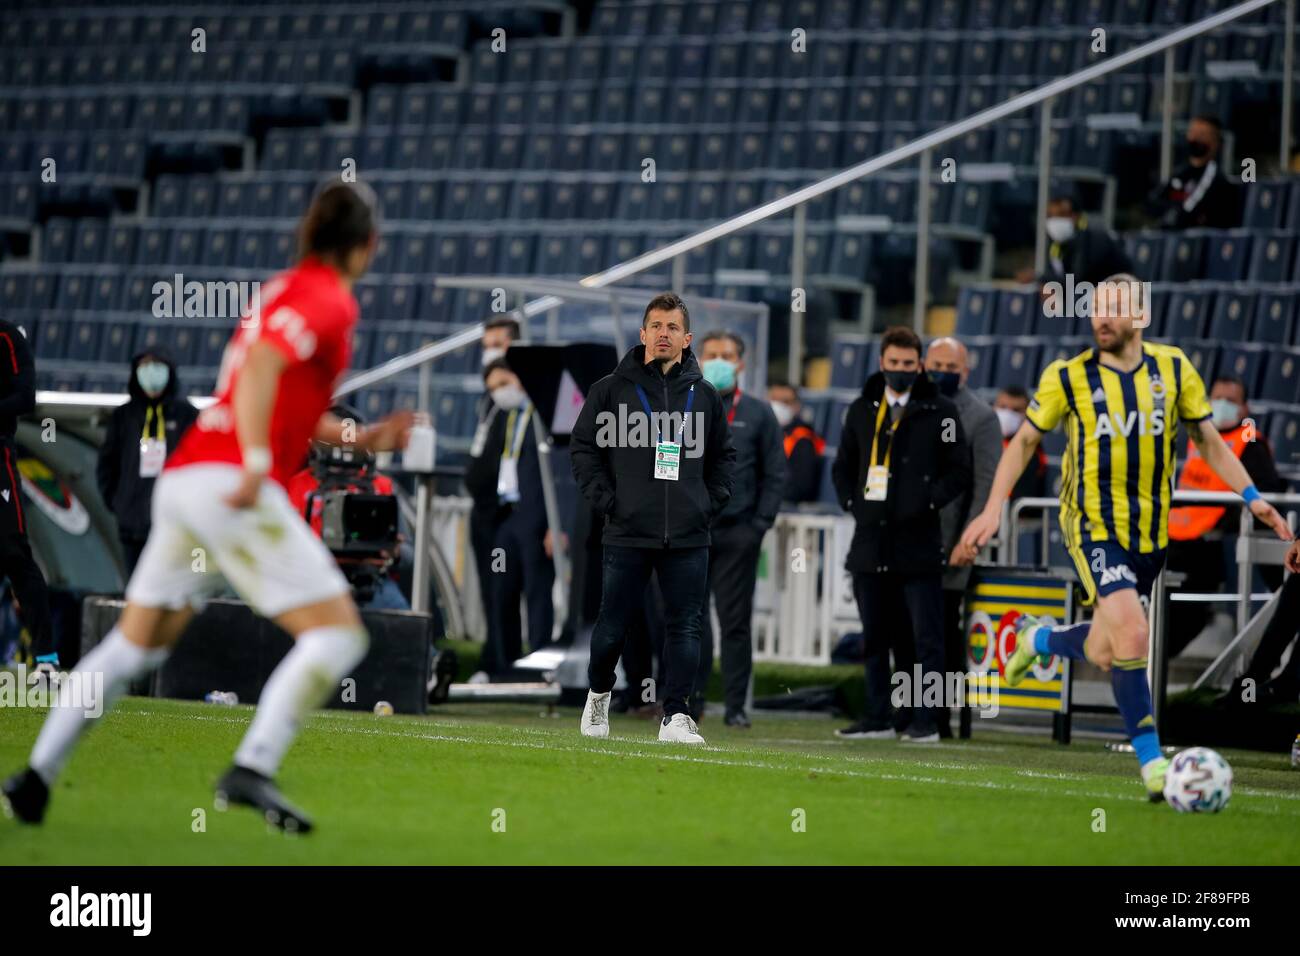 ISTANBUL, TURKEY - APRIL 12:  during the Super Lig match between Fenerbahce SK and Gaziantep FK at Sukru Saracoglu Stadium on April 12, 2021 in Istanb Stock Photo